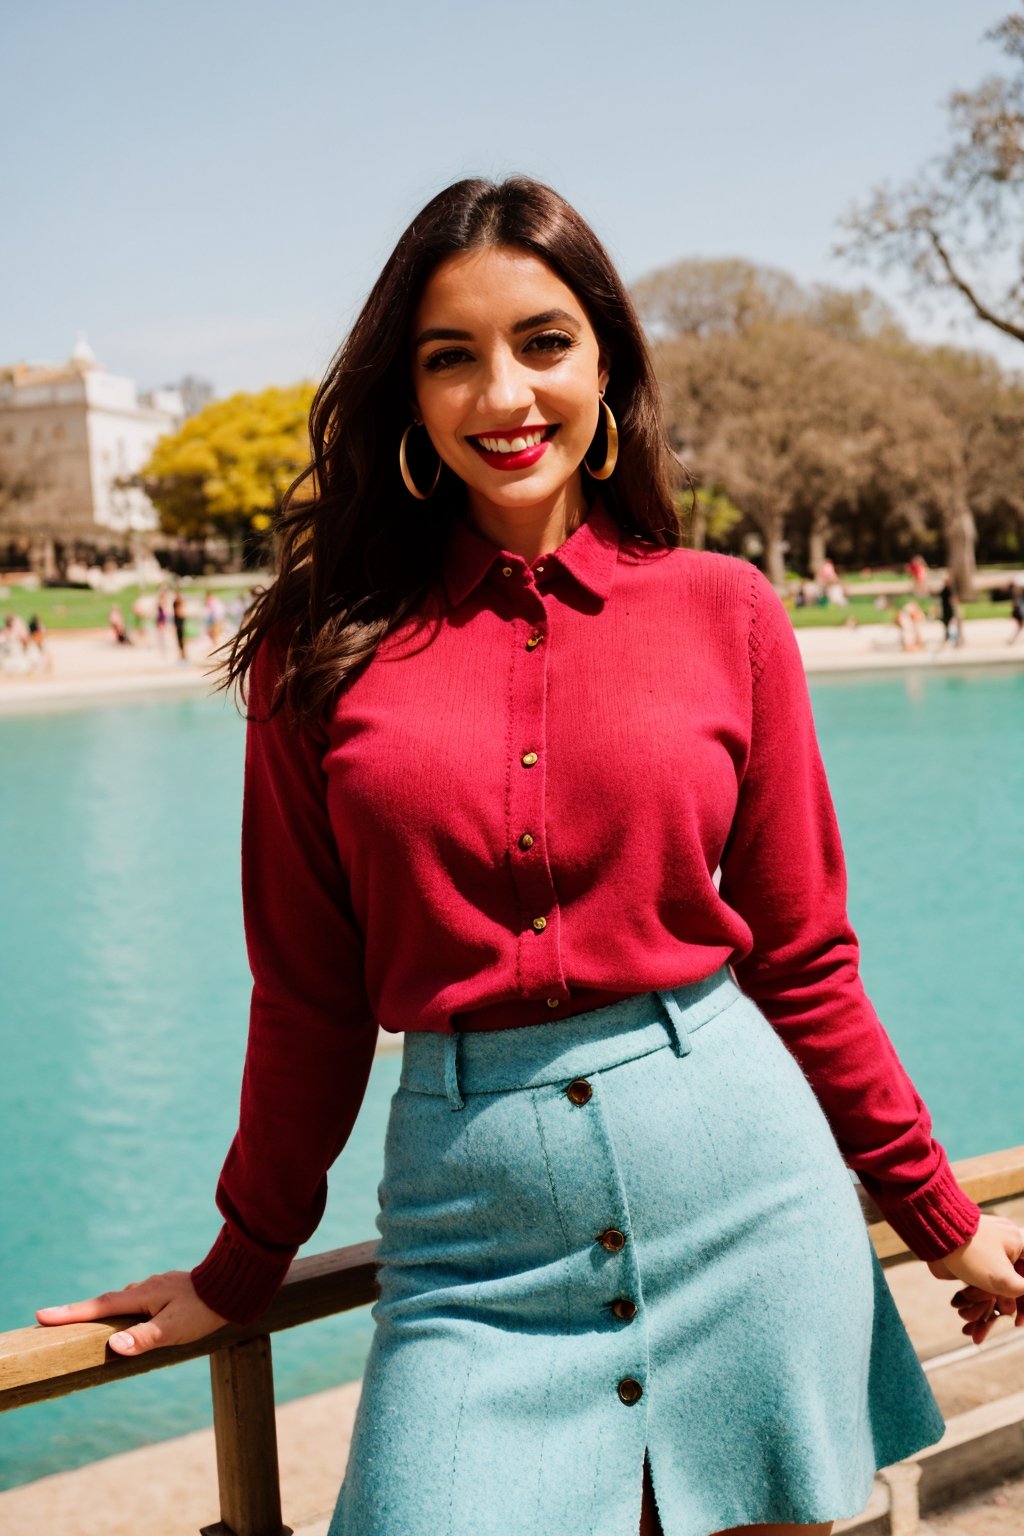 Create a beautiful spanish women, hourglass body shape, Brunette, pink lips, blue eyes, red knitted shirt and skirt, golden earrings,happy, smiling, background of amusment park.photo r3al,detailmaster2,aesthetic portrait